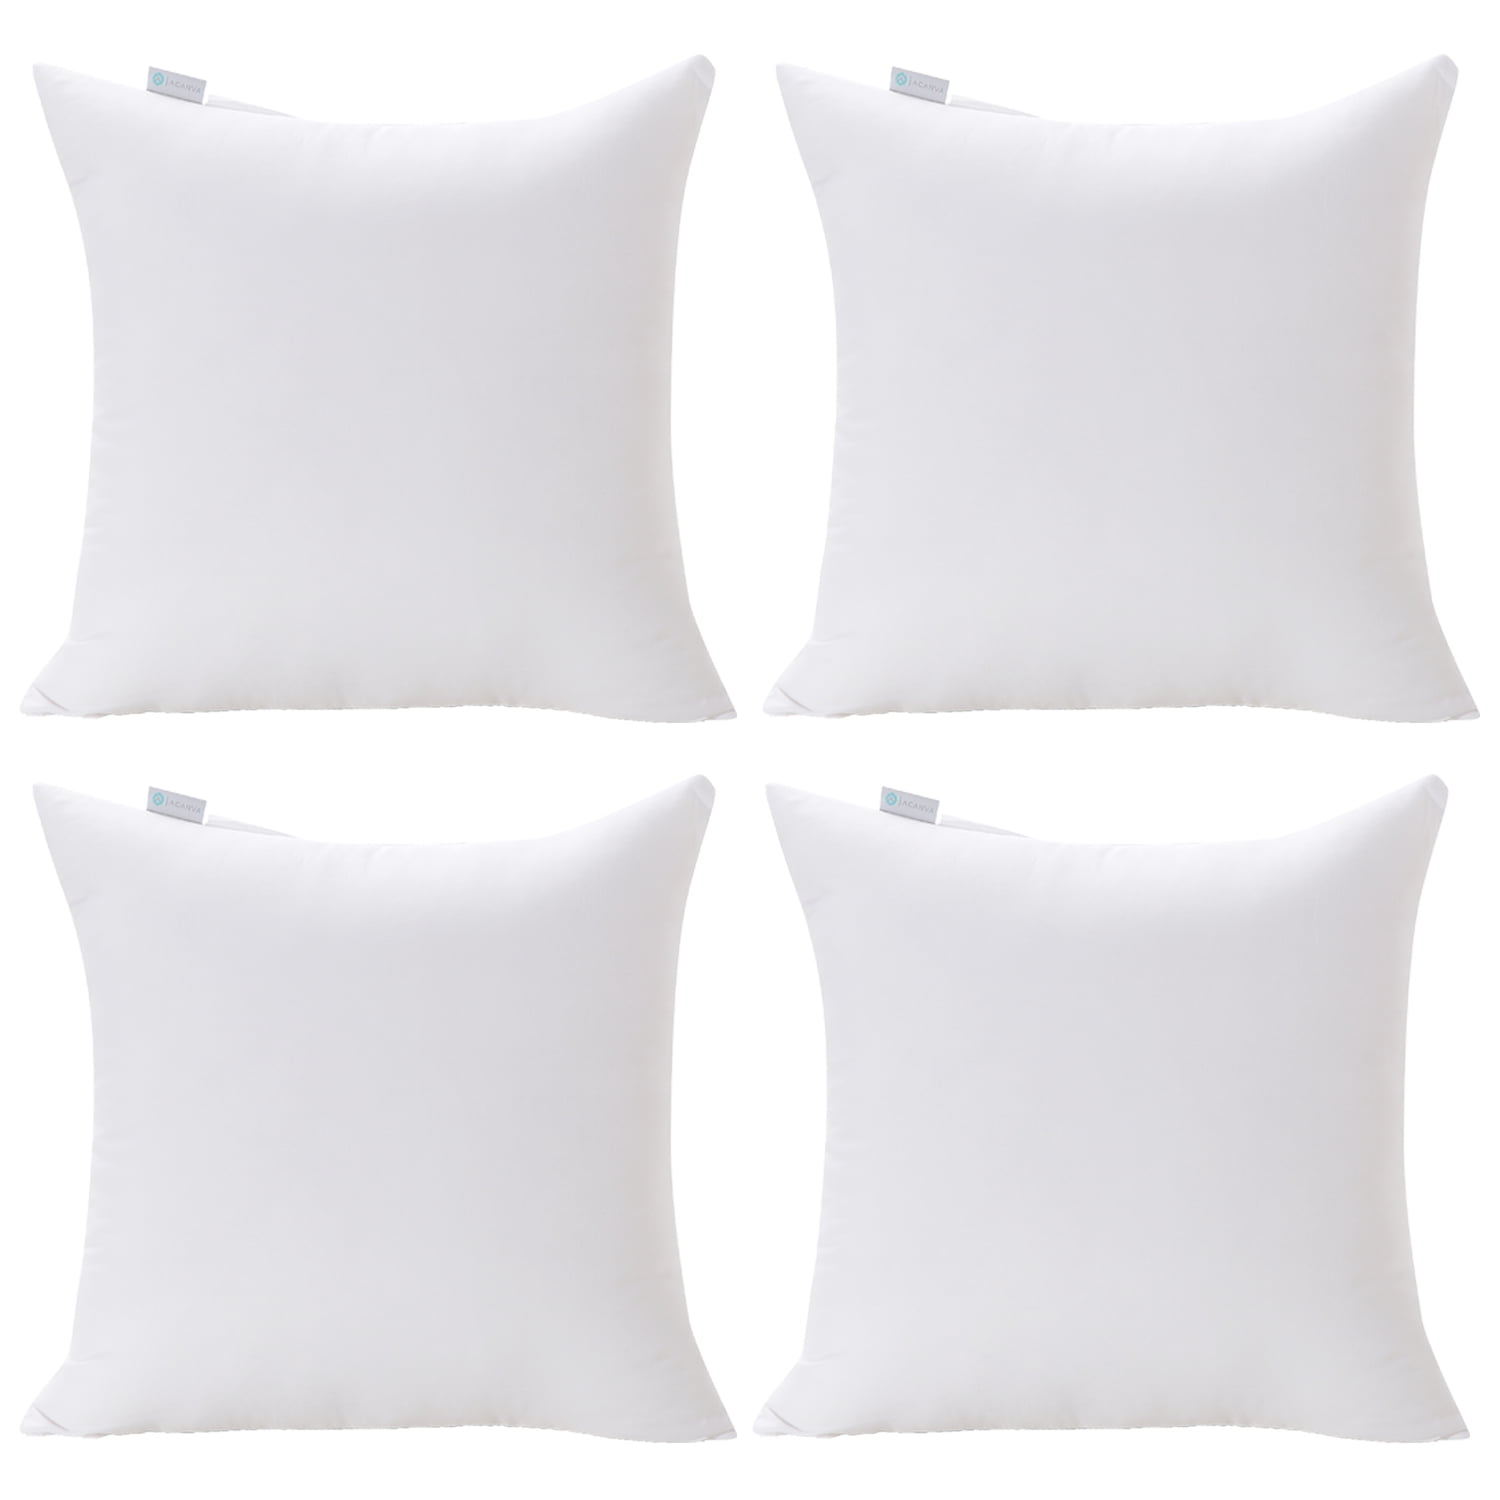 Details about   Acanva Hypoallergenic Pillow Insert Form Cushion Square 20" L x 20" W Pack of 4 